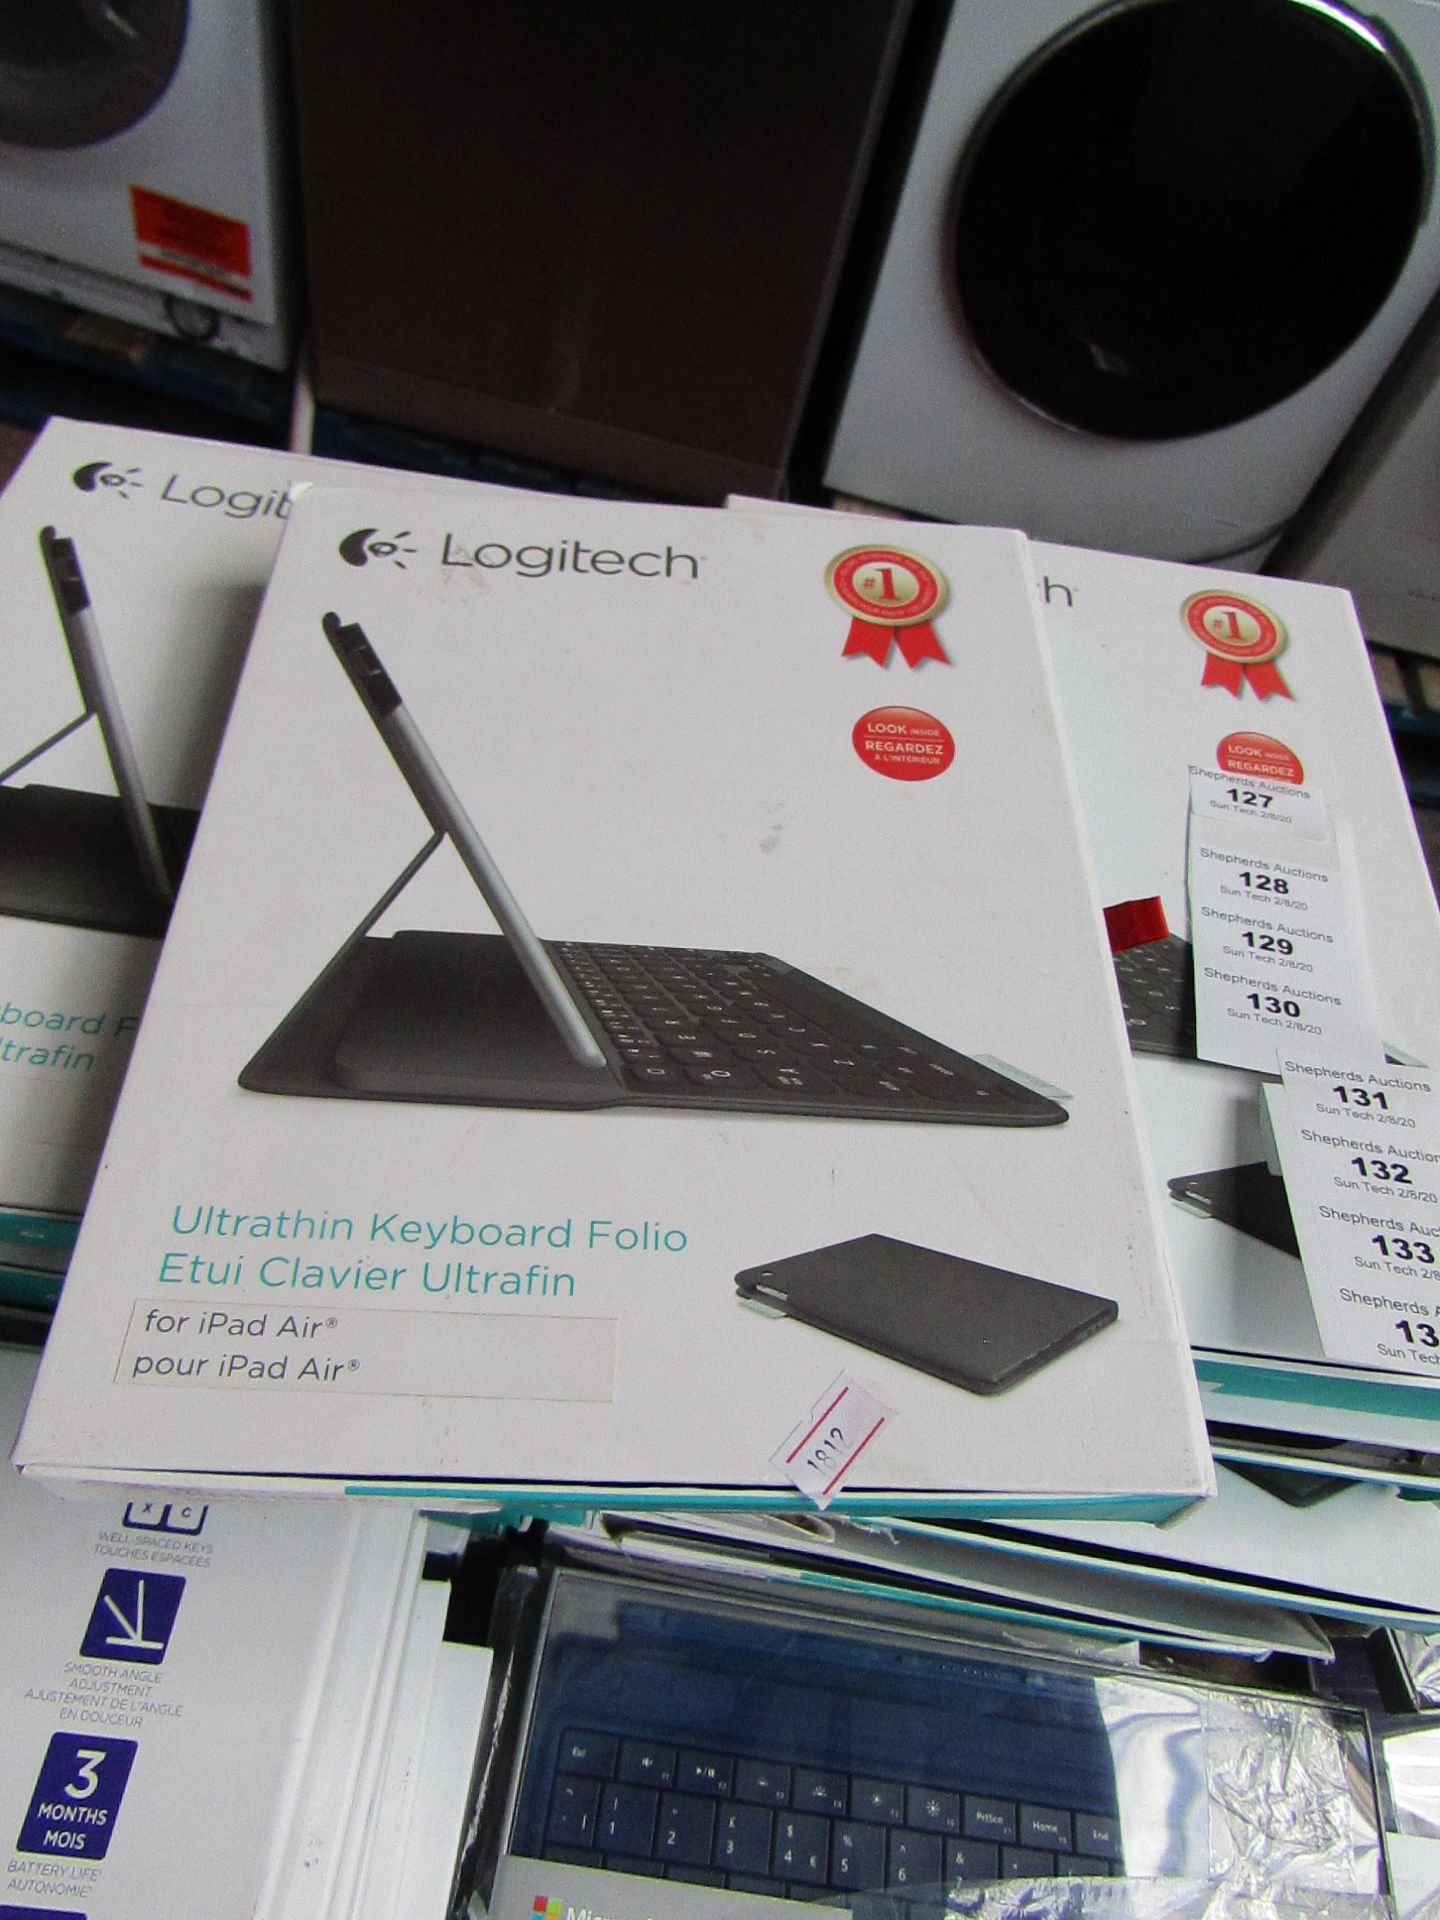 Logitech ultra thin keyboard folio for iPad Air, untested and boxed. QWERTY keyboard